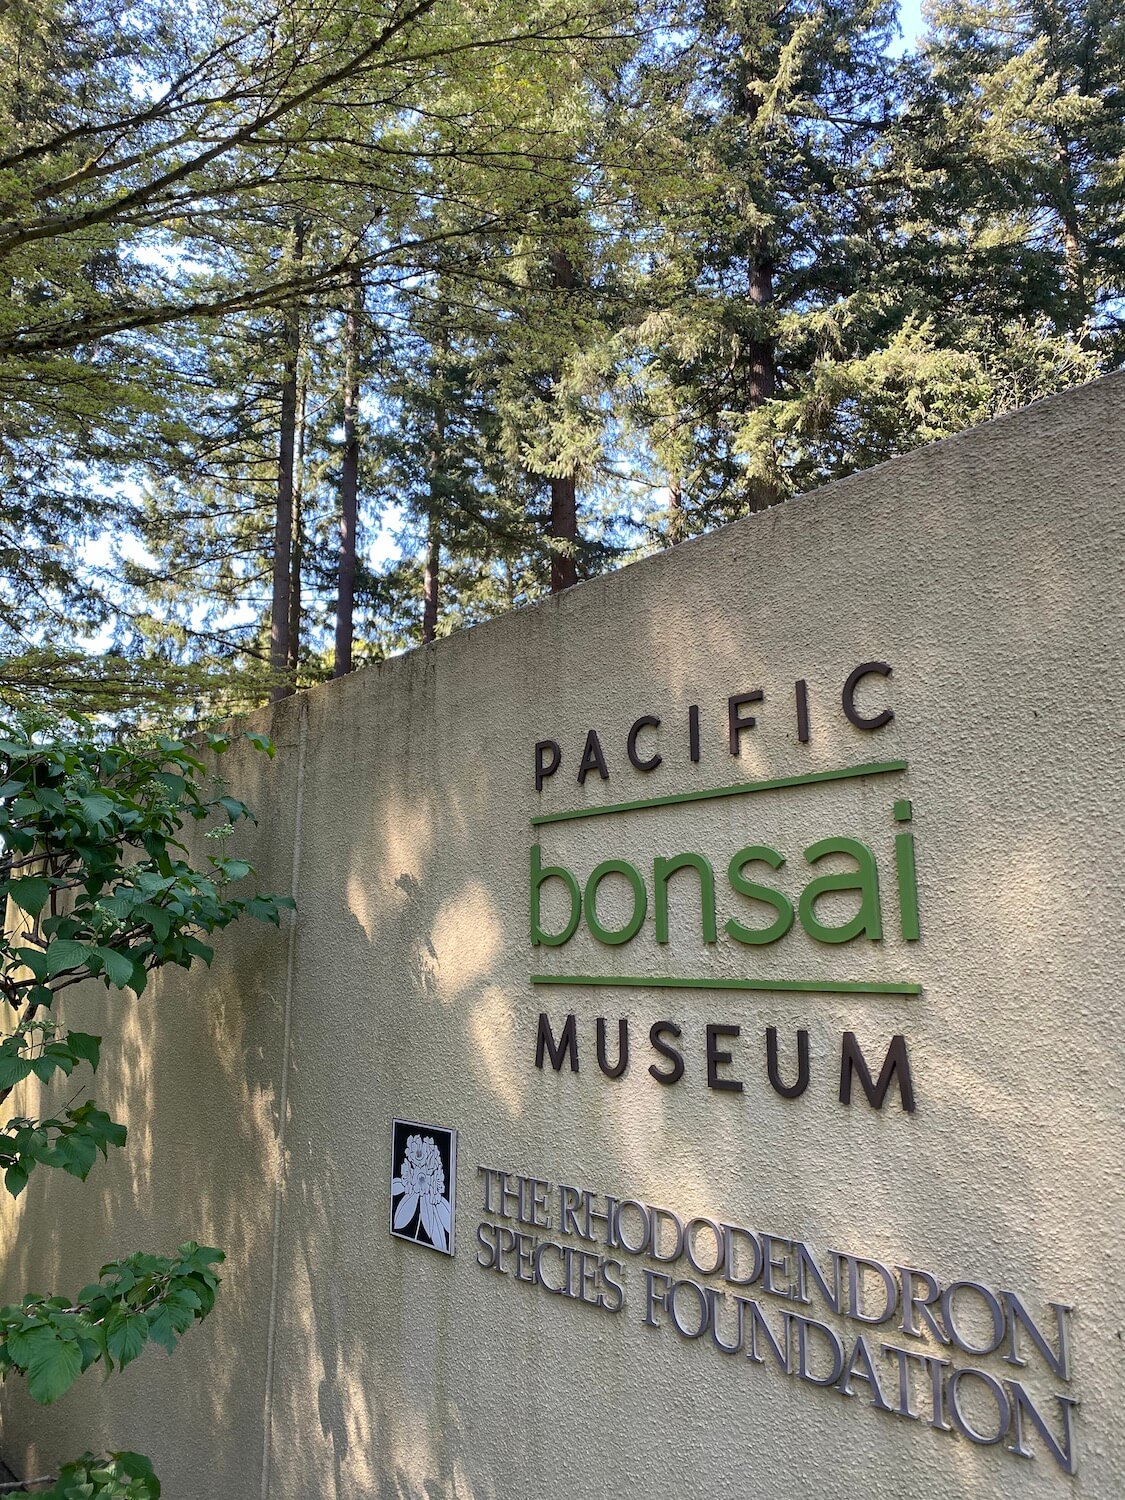 The Pacific Bonsai Museum is one with nature under the canopy of fir trees.  This shot shows the entrance gate to the museum, which shares space with the Rhododendron Species Botanical Garden.